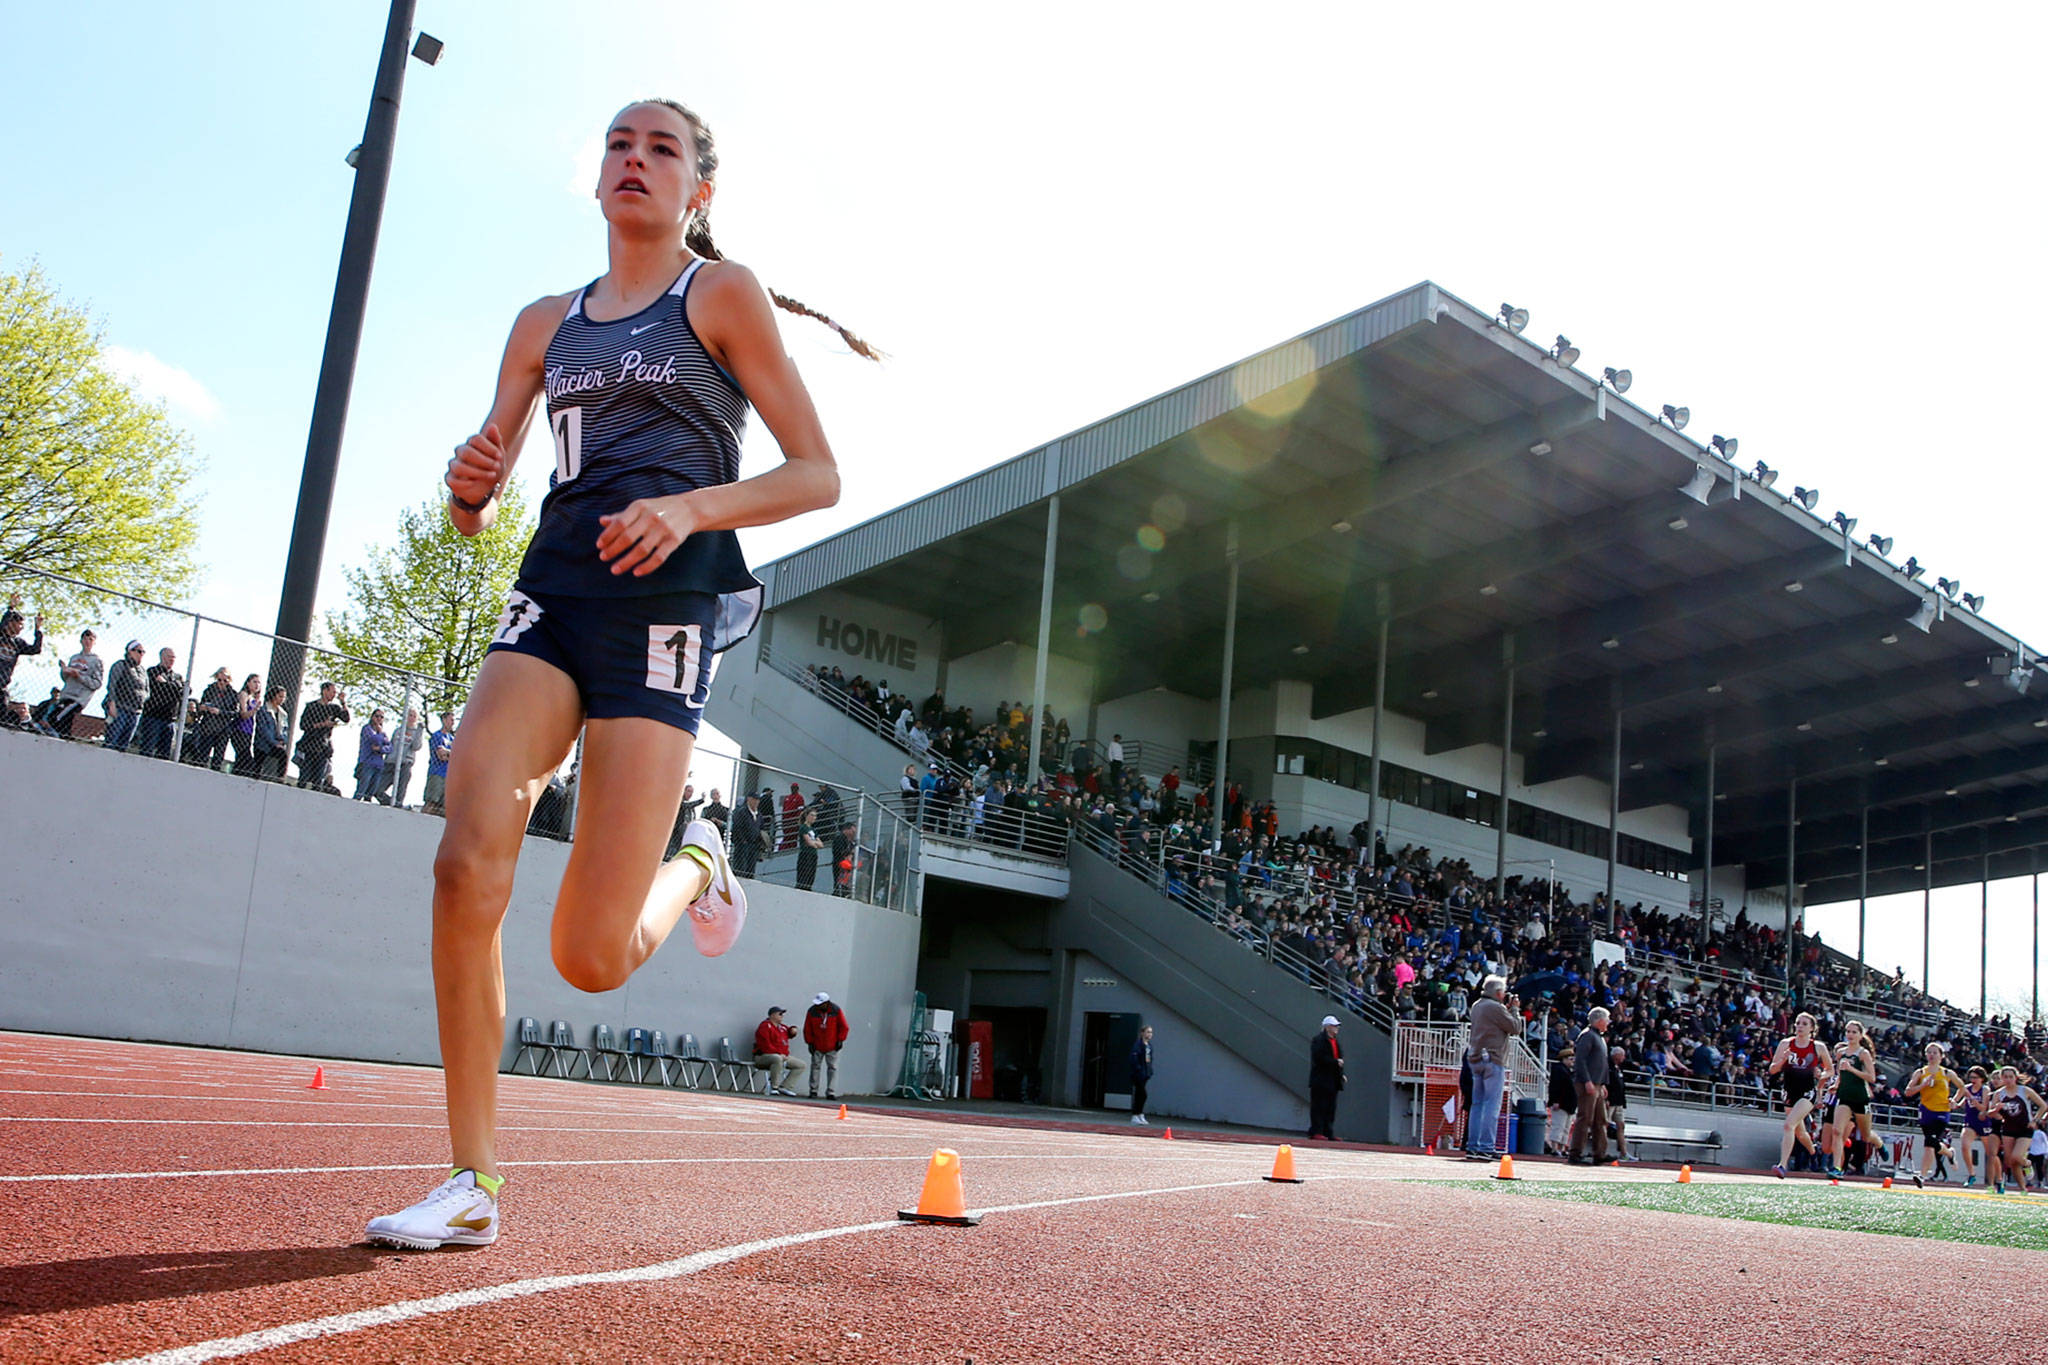 Glacier Peak junior Aviry Stratton is one of many highly ranked local athletes who are set to compete in this week’s state track and field championships. (Kevin Clark / The Herald)